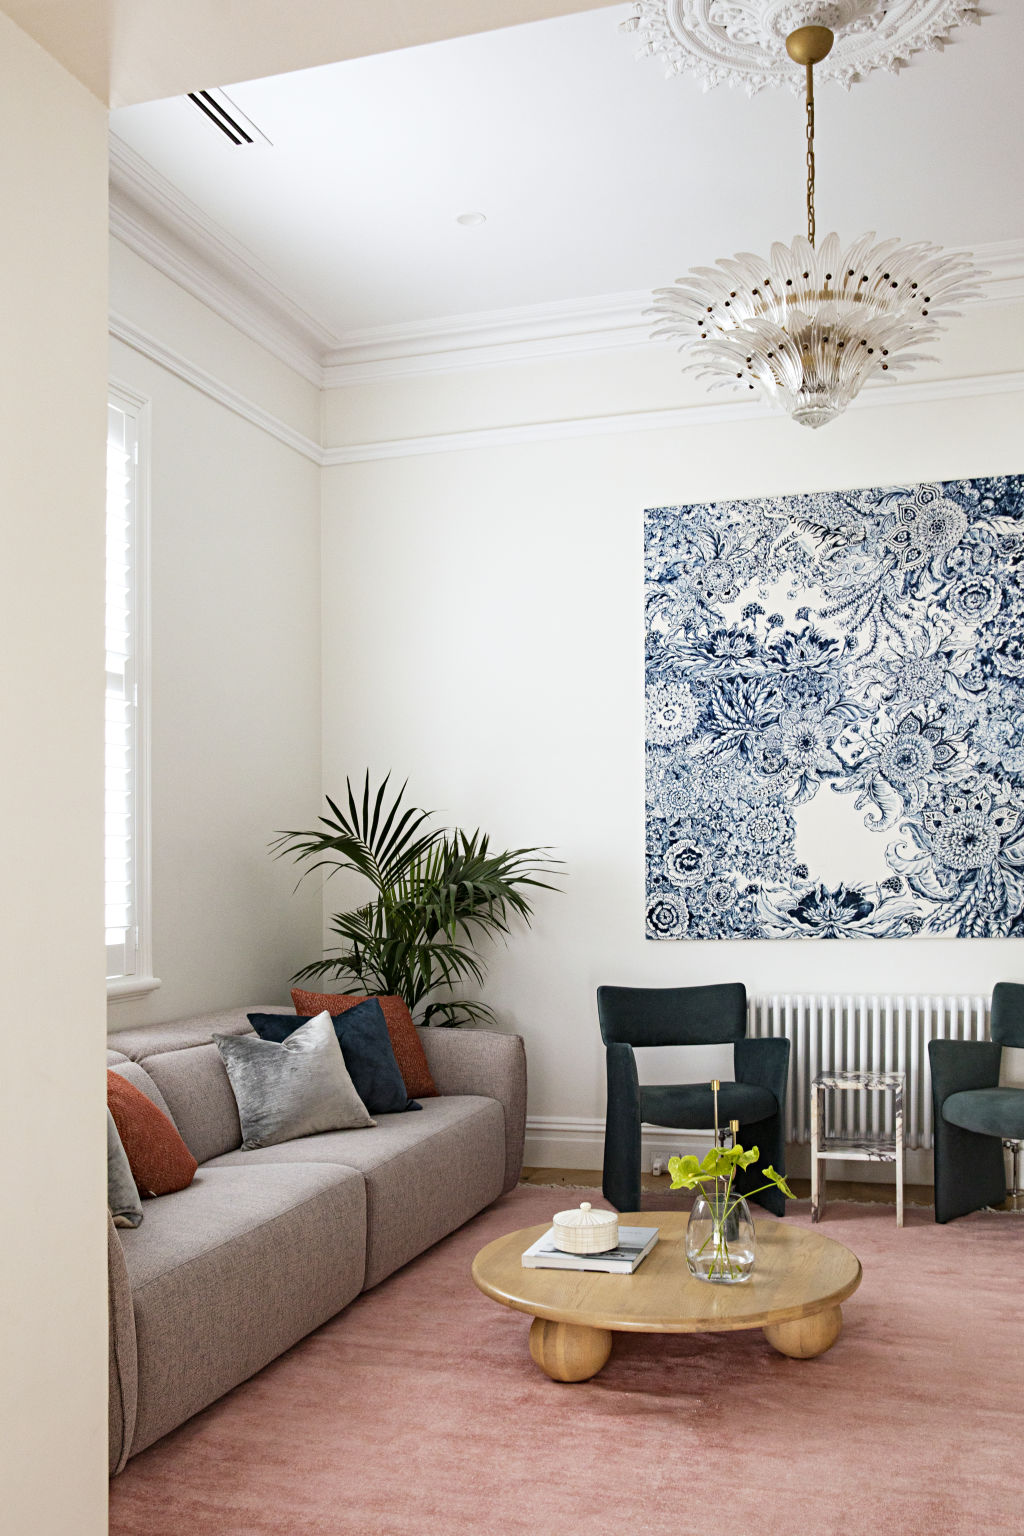 The home features ornate heritage details. Photo: Natalie Jeffcott